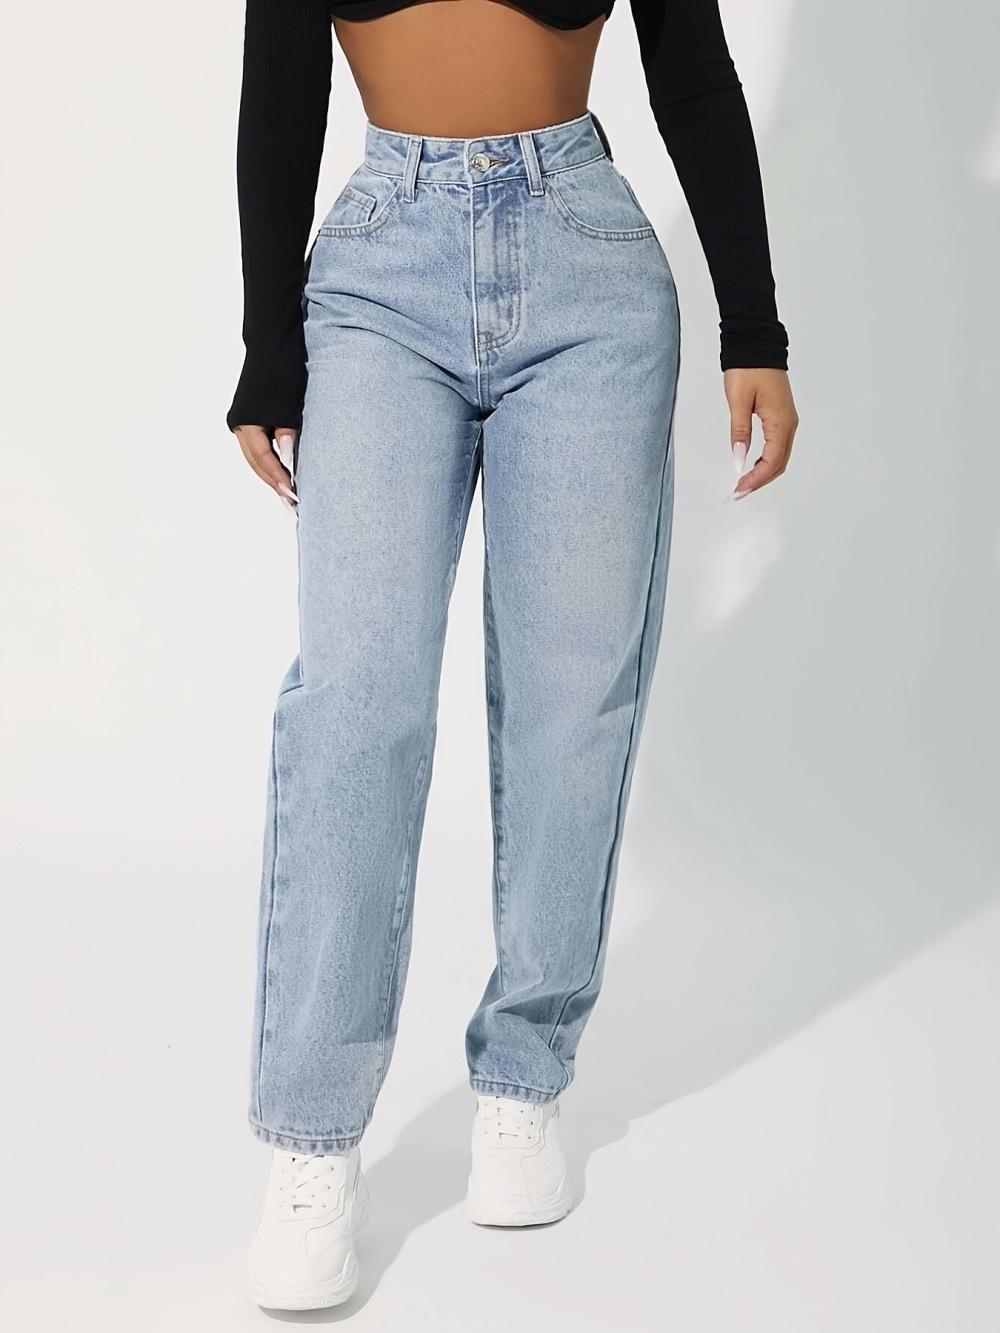 European style Casual loose jeans for women